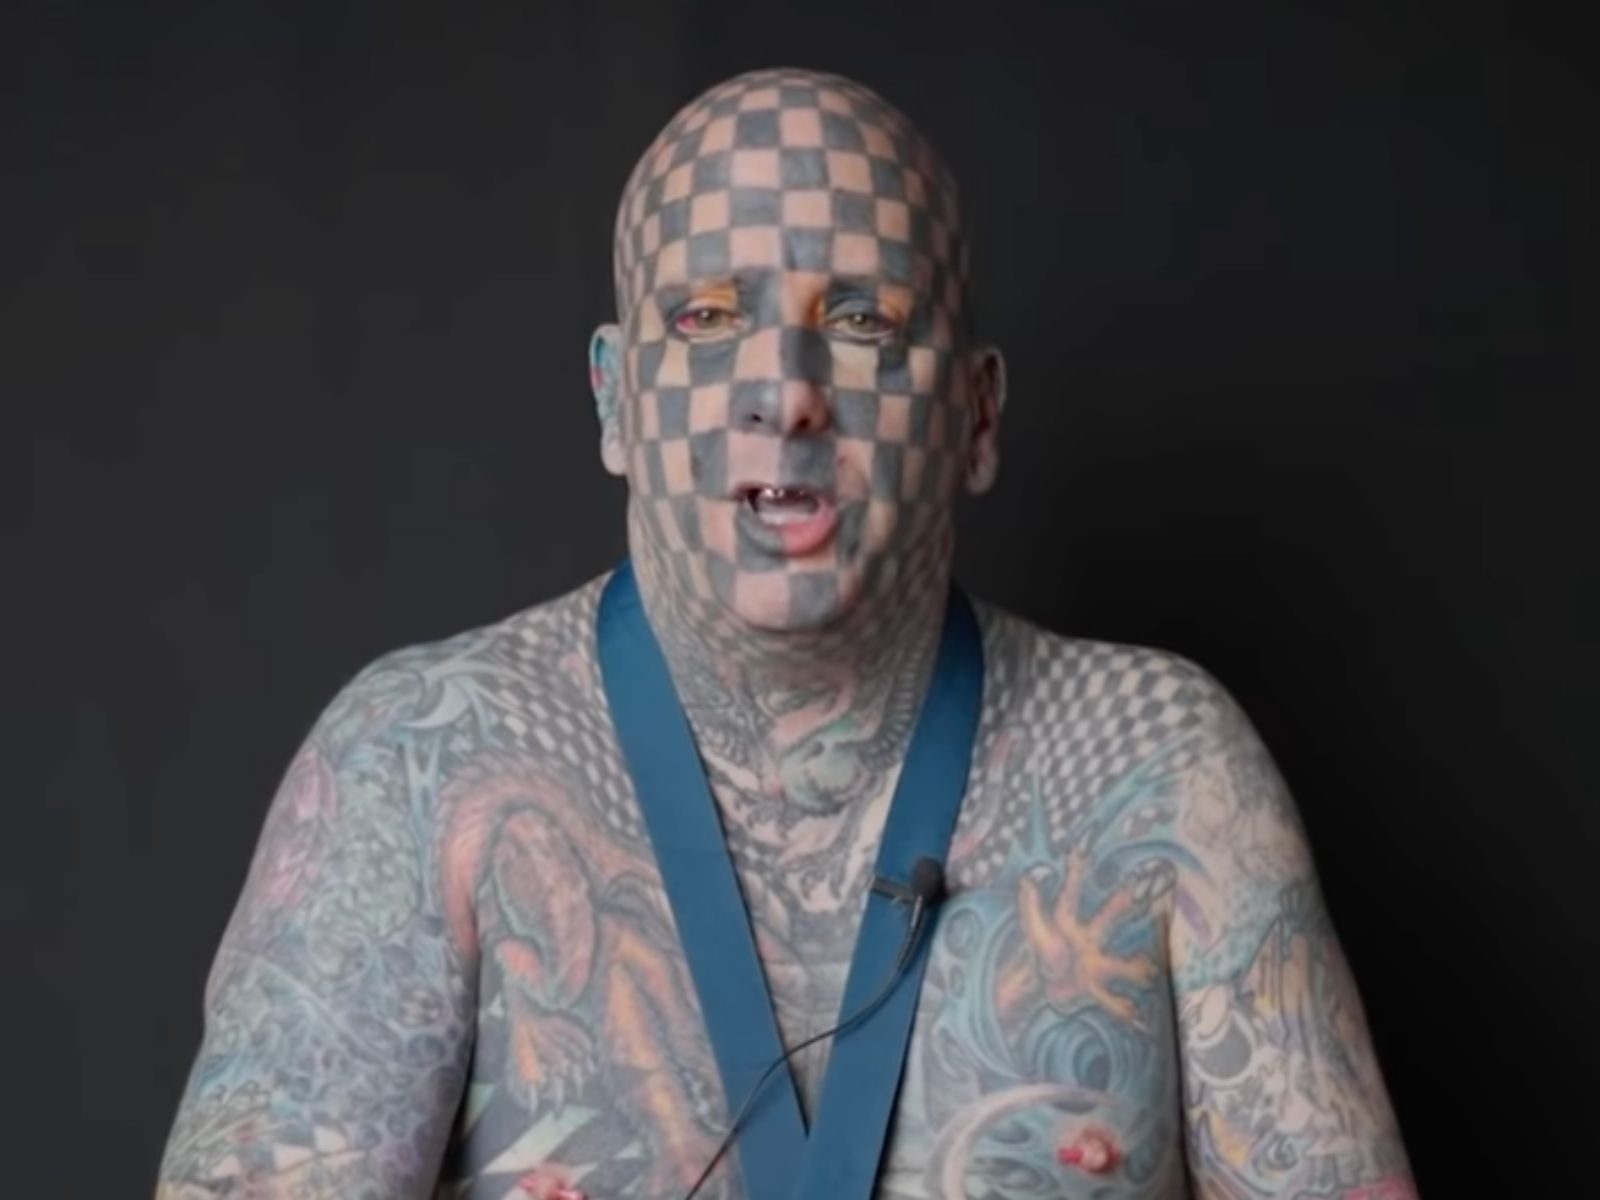 Man With Record Square Tattoos on Body Opens Up About the Most Painful One  Yet - News18